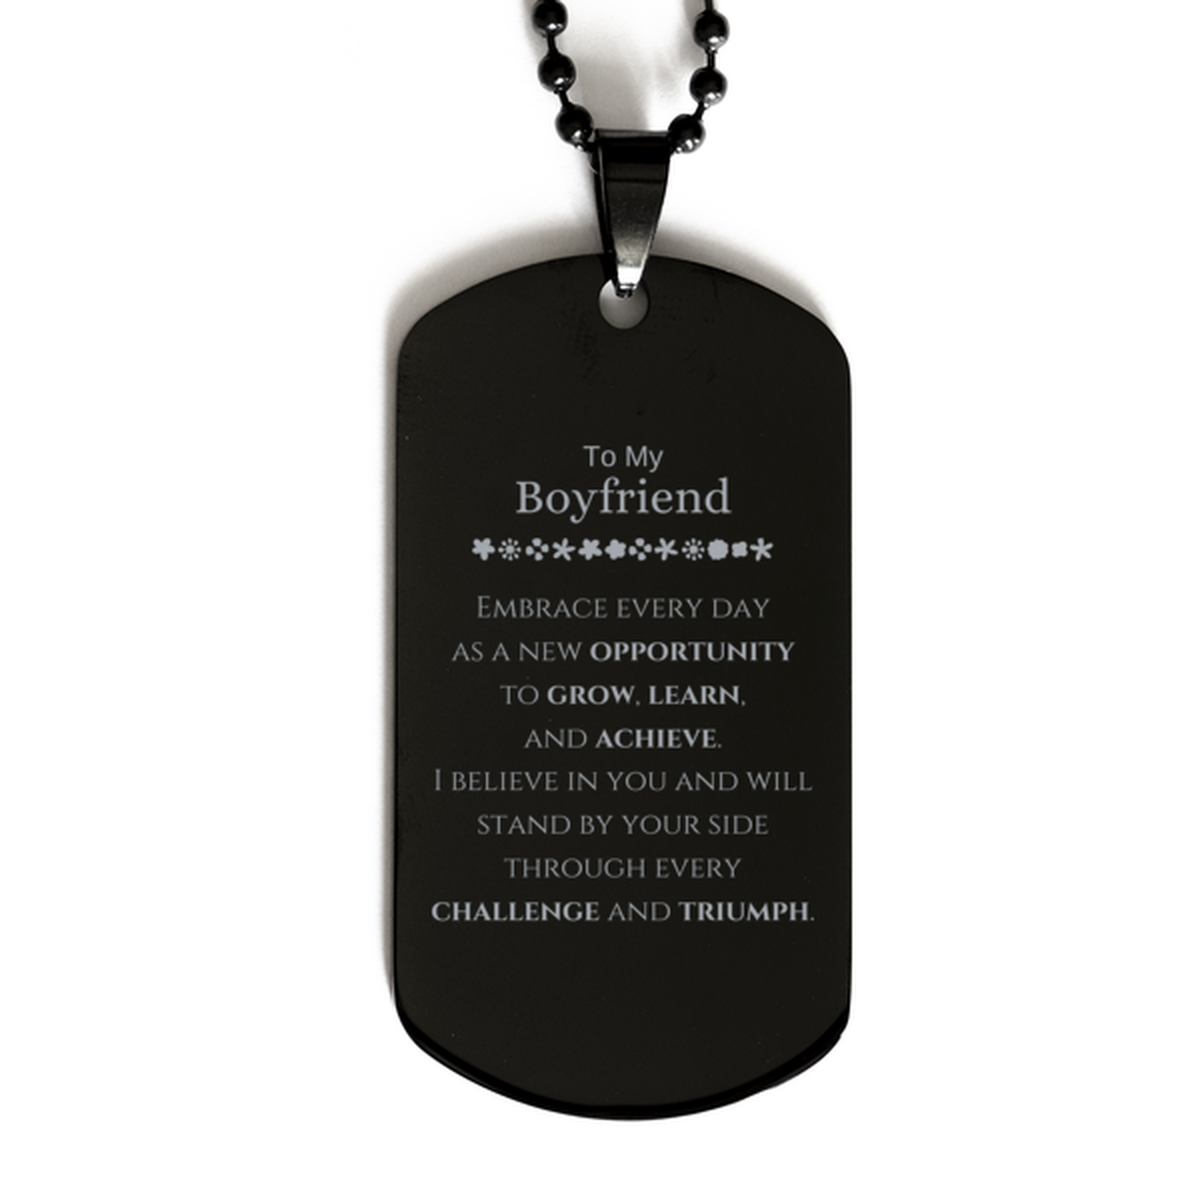 To My Boyfriend Gifts, I believe in you and will stand by your side, Inspirational Black Dog Tag For Boyfriend, Birthday Christmas Motivational Boyfriend Gifts